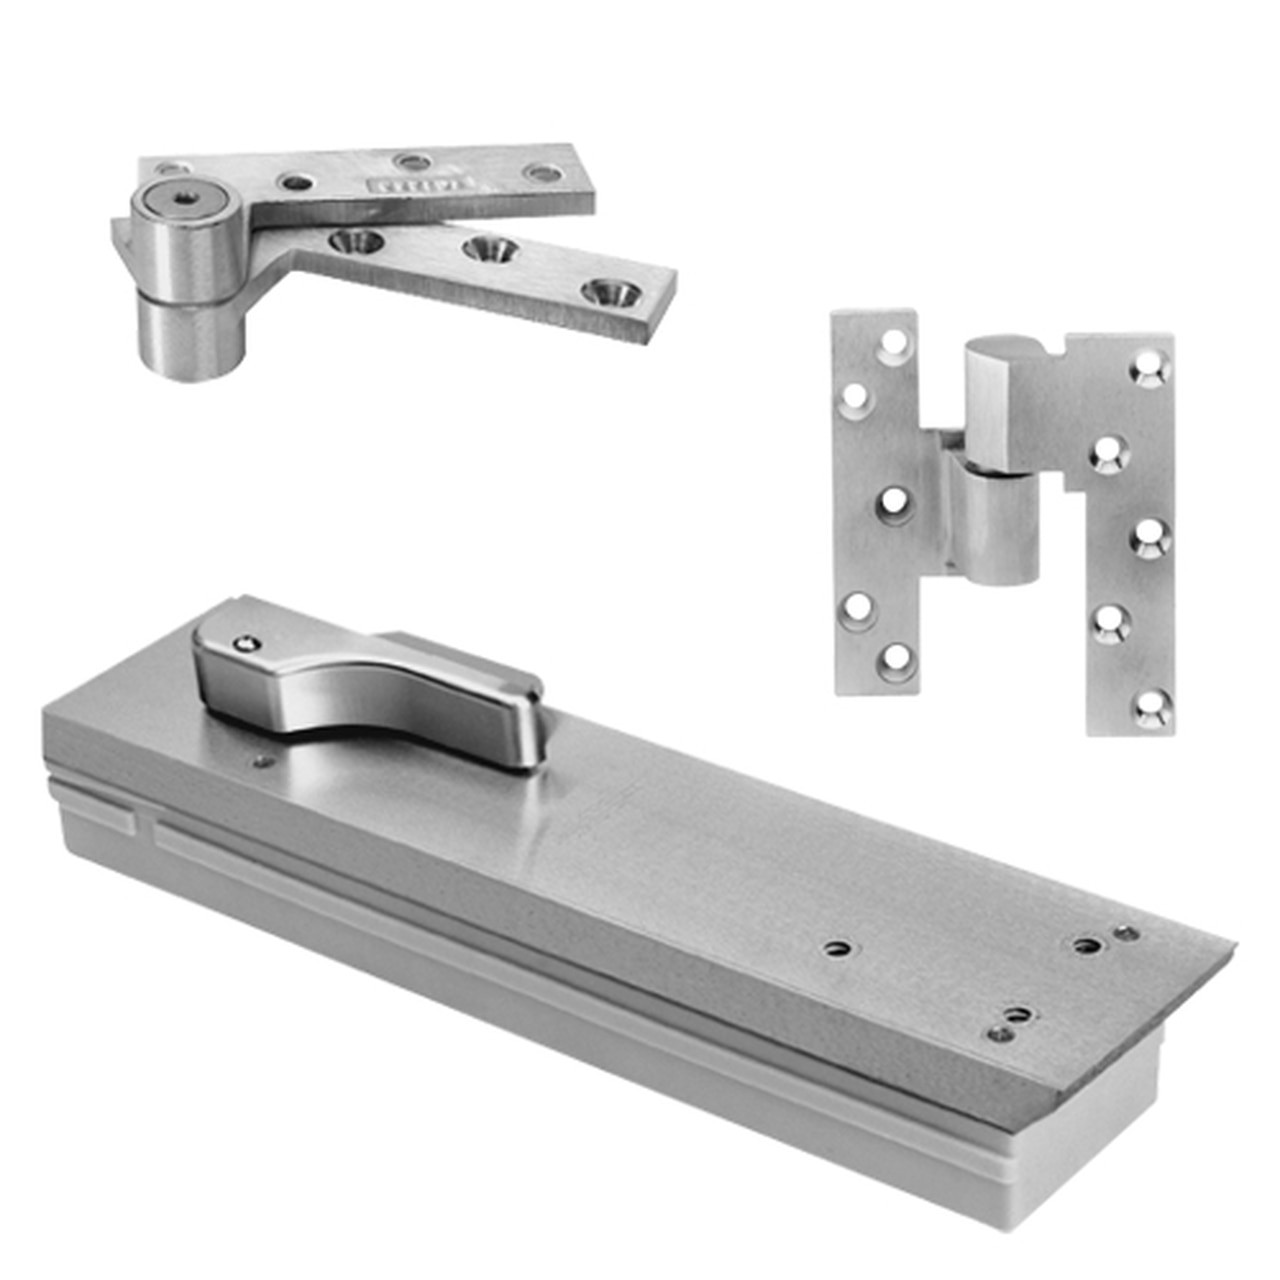 FQ5105NBC-LFP-LTP-LH-626 Rixson Q51 Series Fire Rated 3/4" Offset Hung Shallow Depth Floor Closers in Satin Chrome Finish